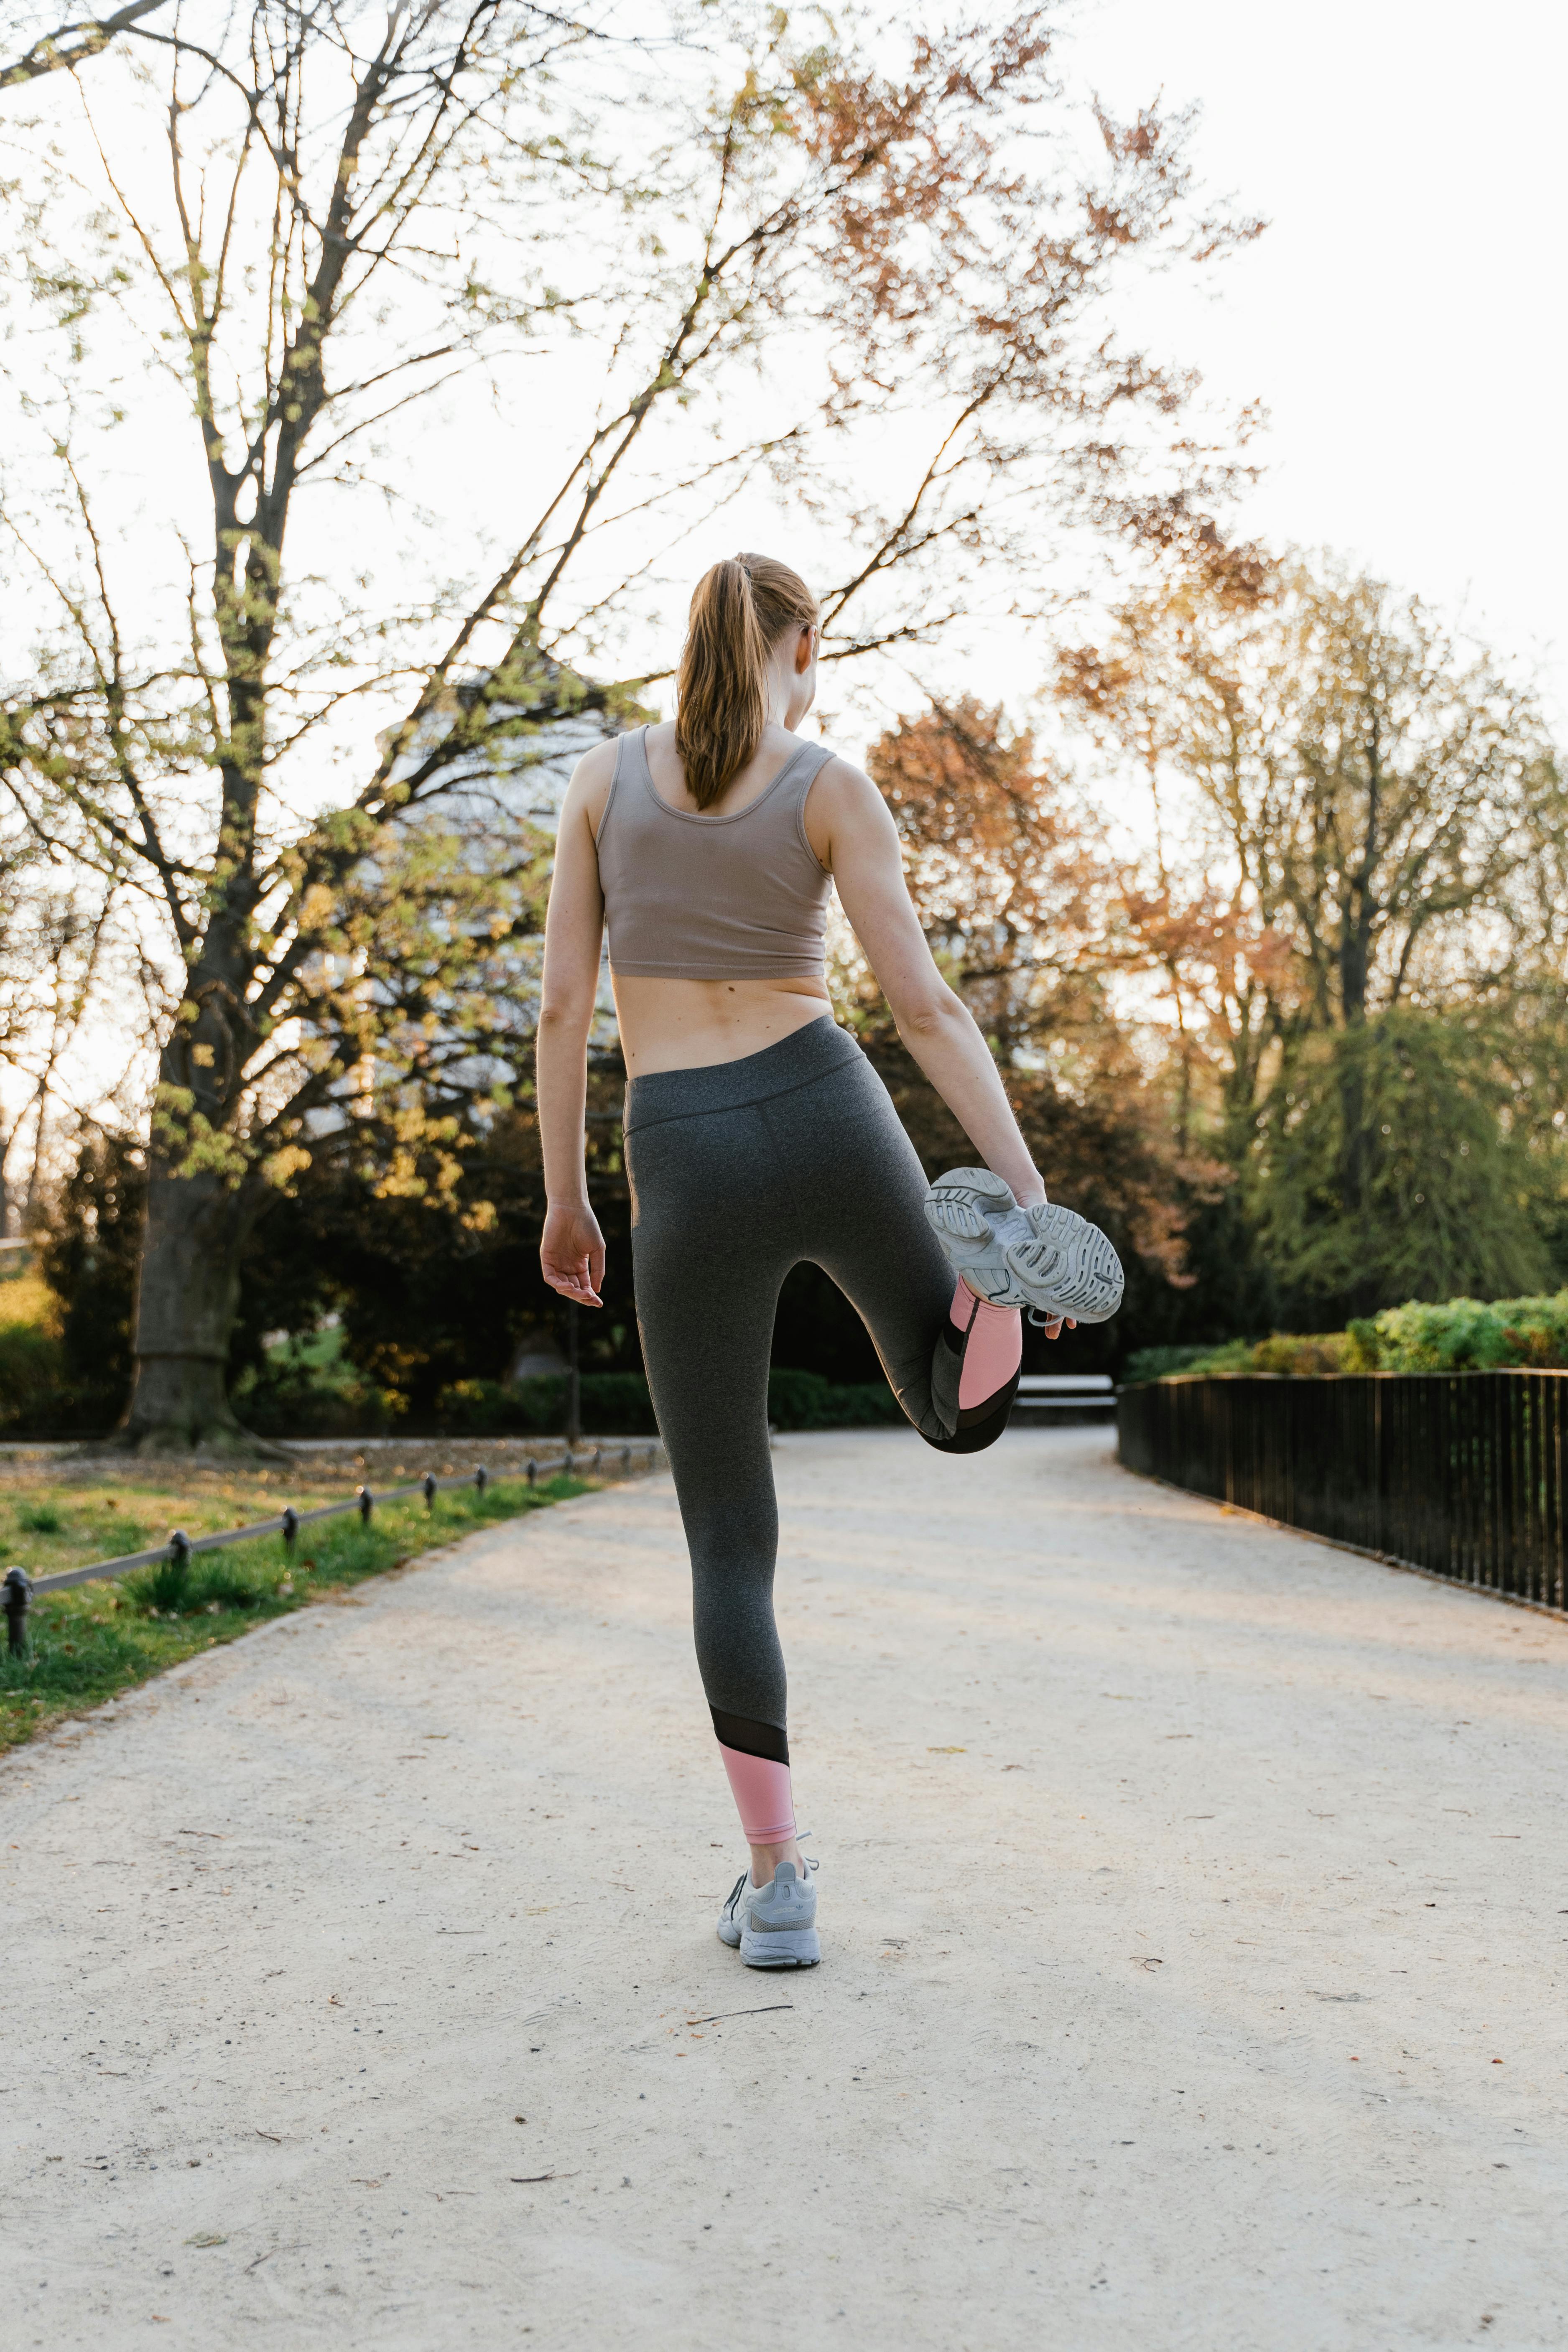 Back View of a Woman in Activewear Stretching her Leg at a Park · Free Stock  Photo